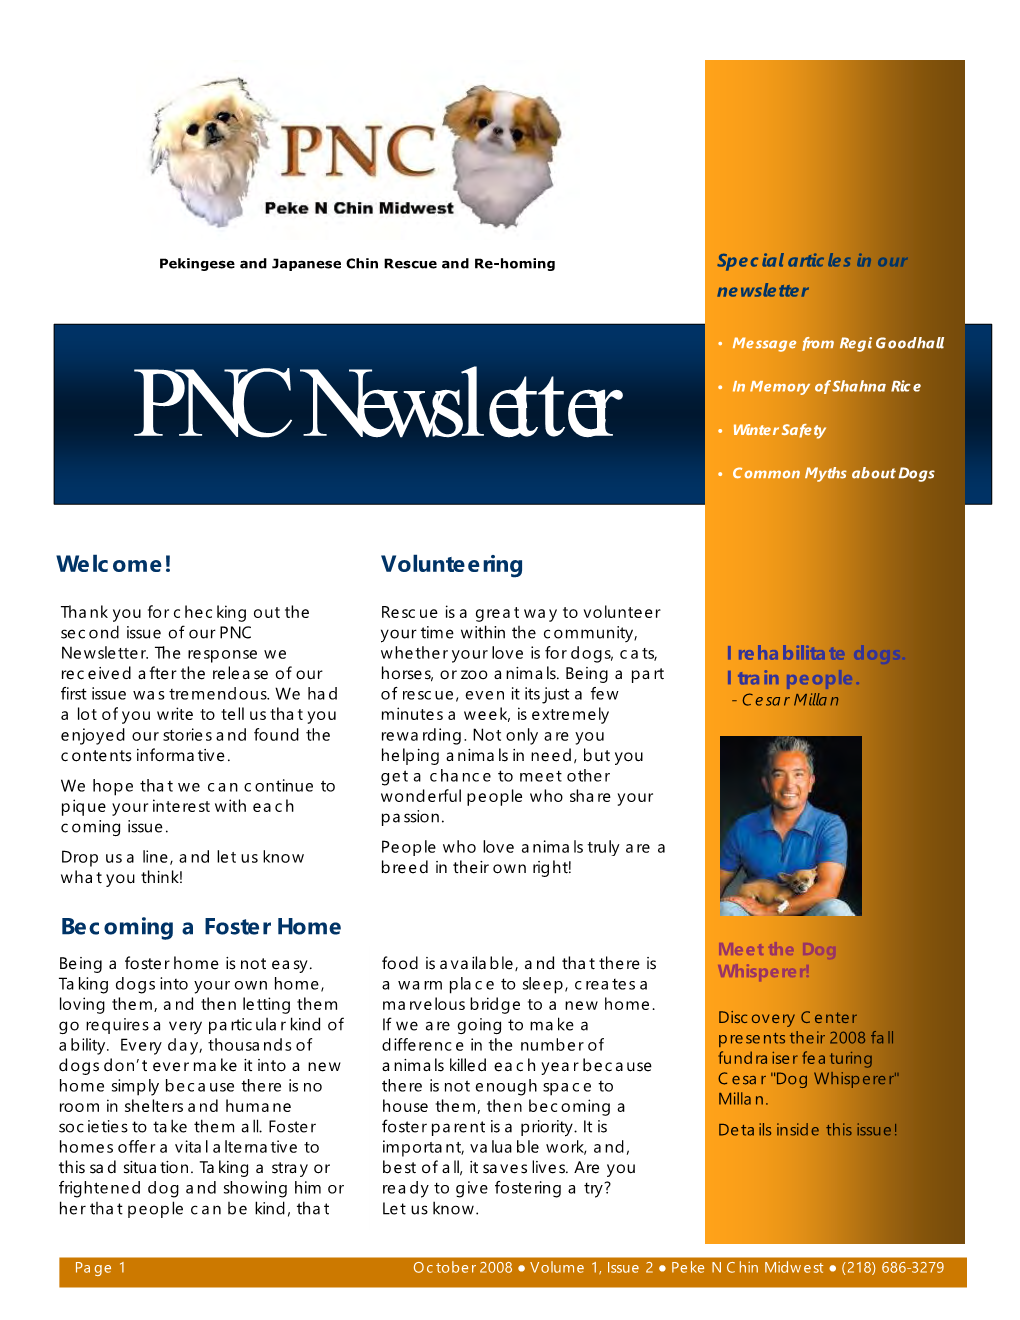 PNC Newsletter • Winter Safety • Common Myths About Dogs